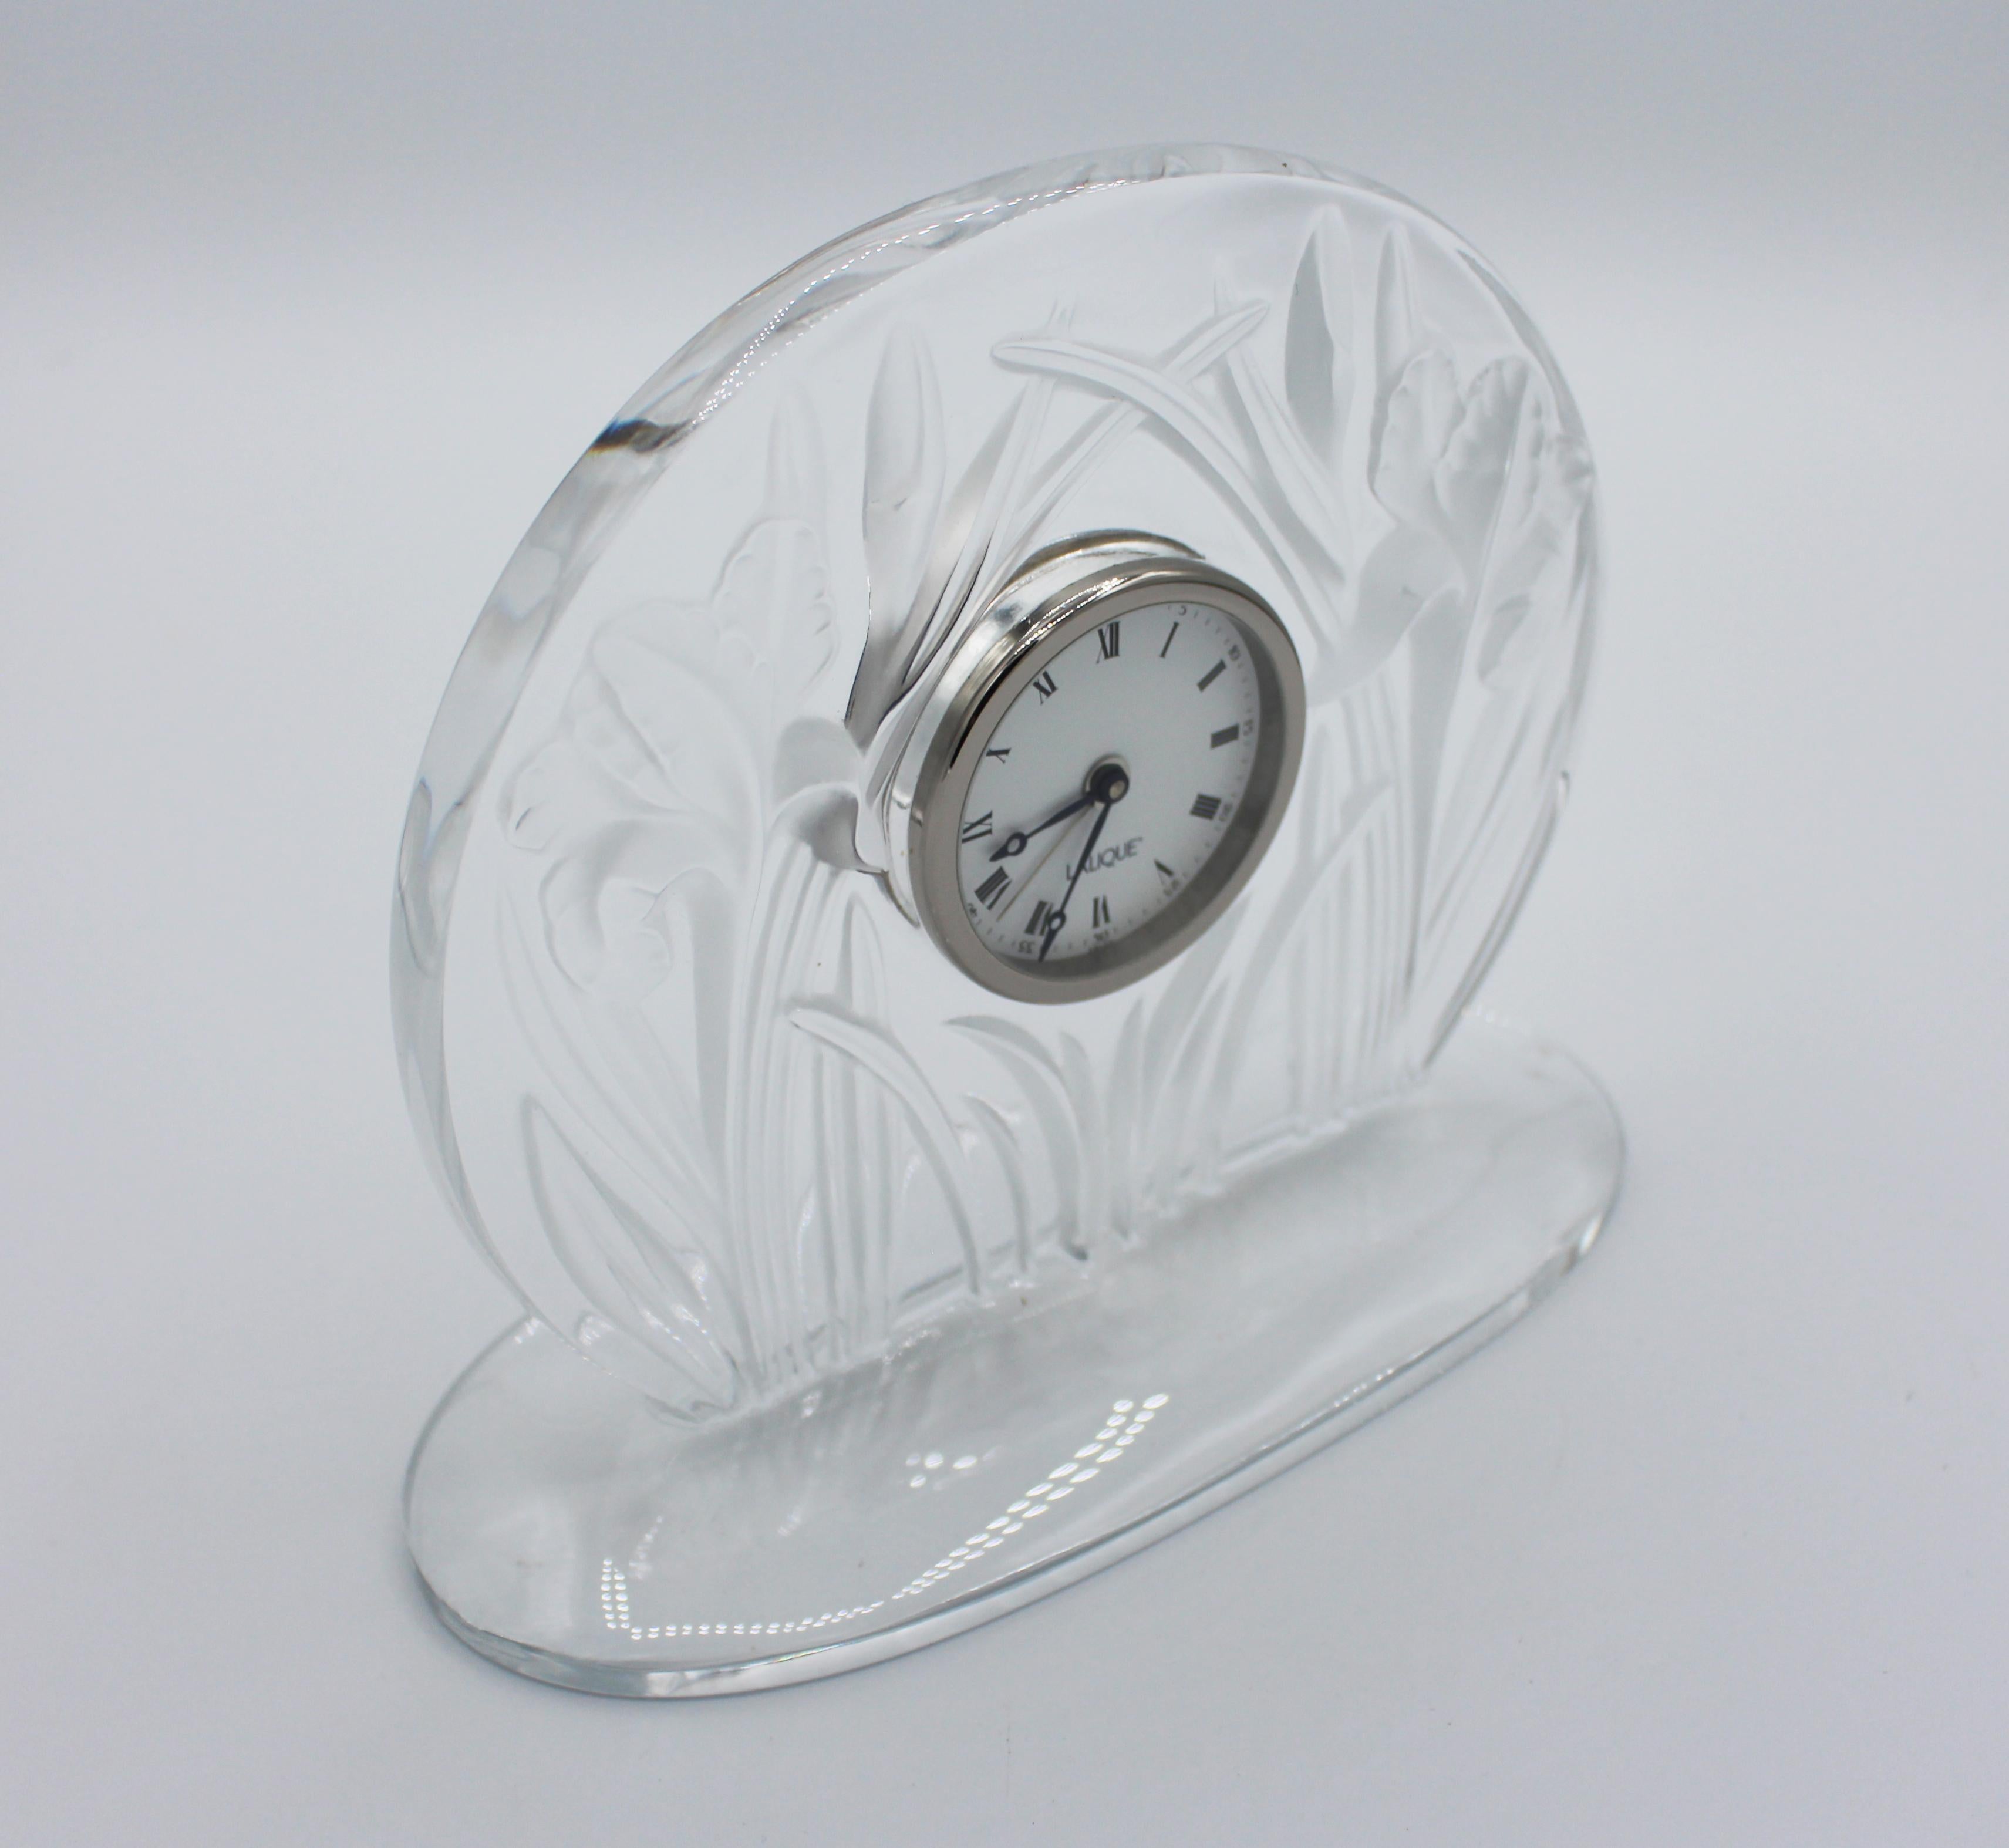 The Iris table clock by Lalique. Frosted and clear glass create a remarkable piece of art glass. Quartz movement. 7